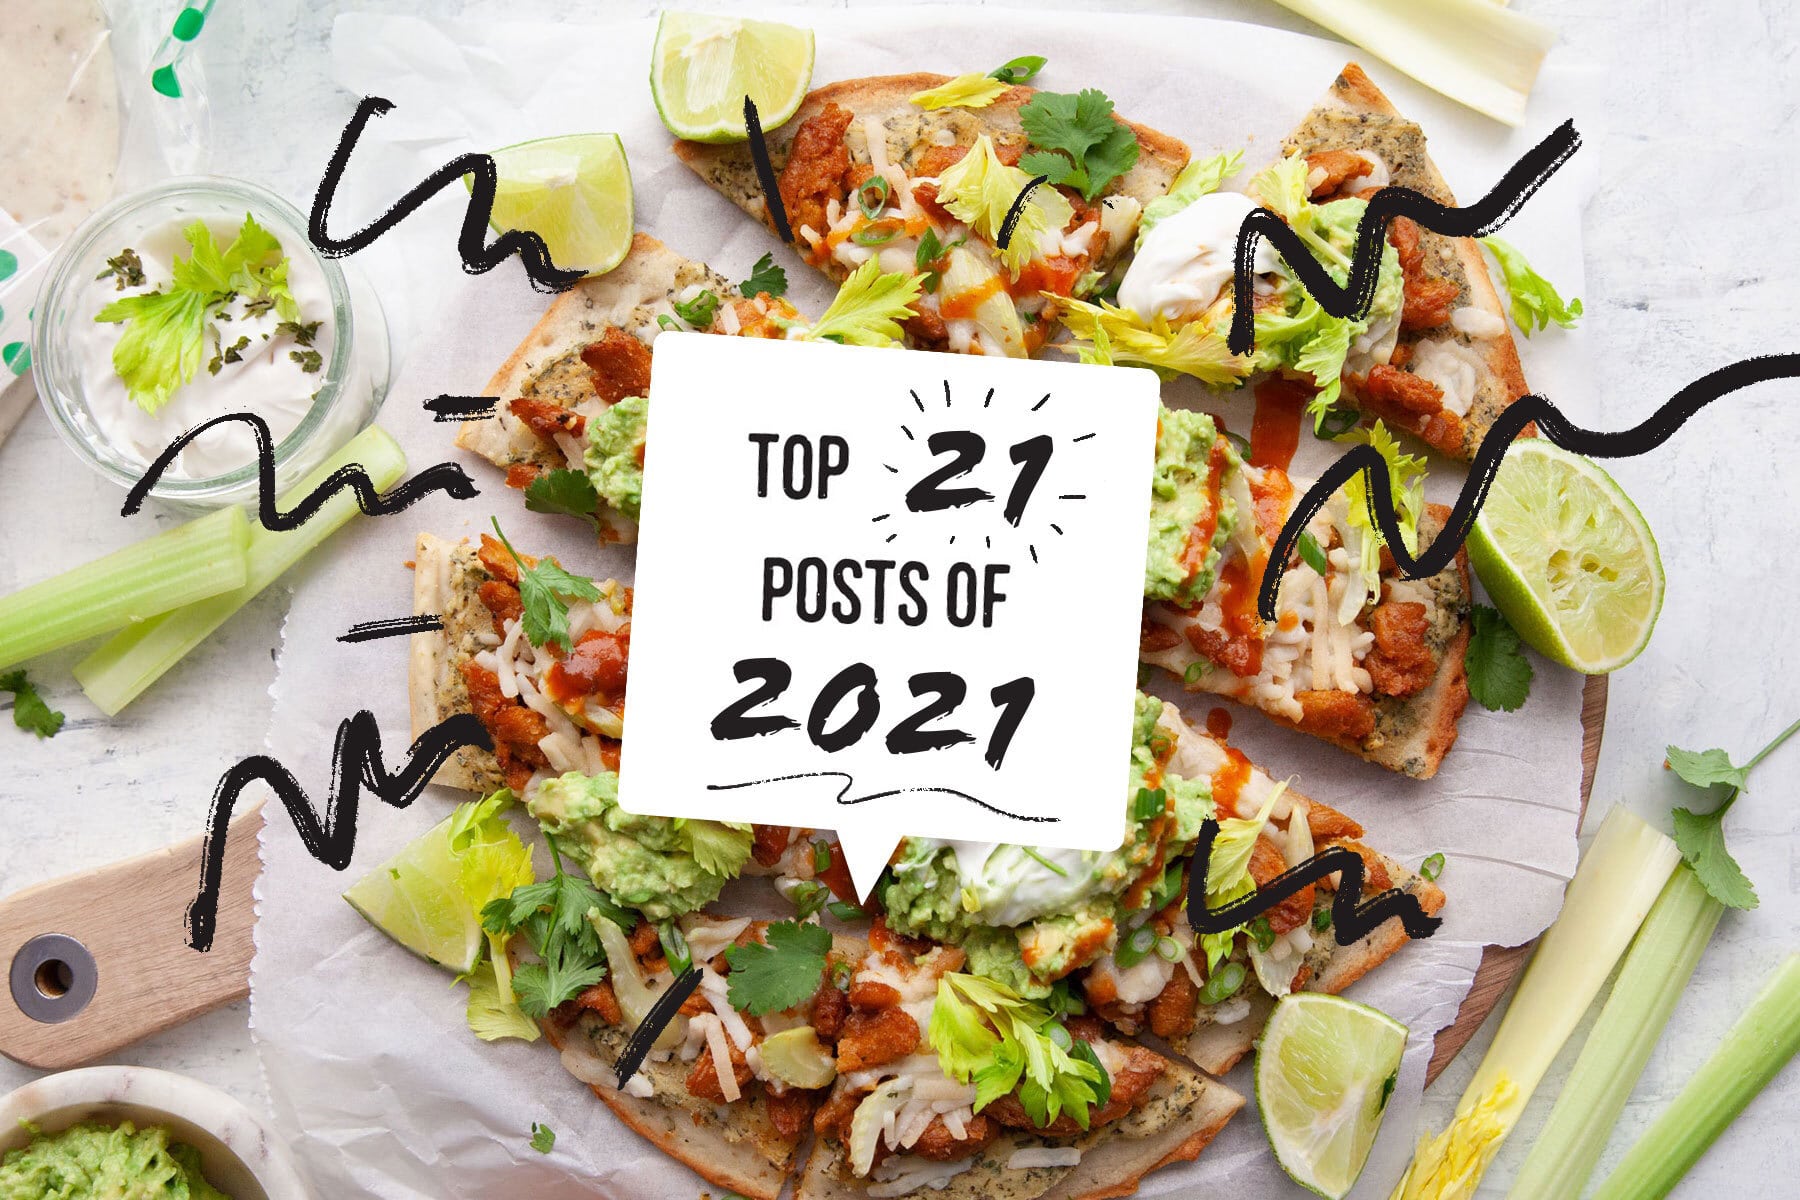 Top 21 Posts of 2021 Graphic